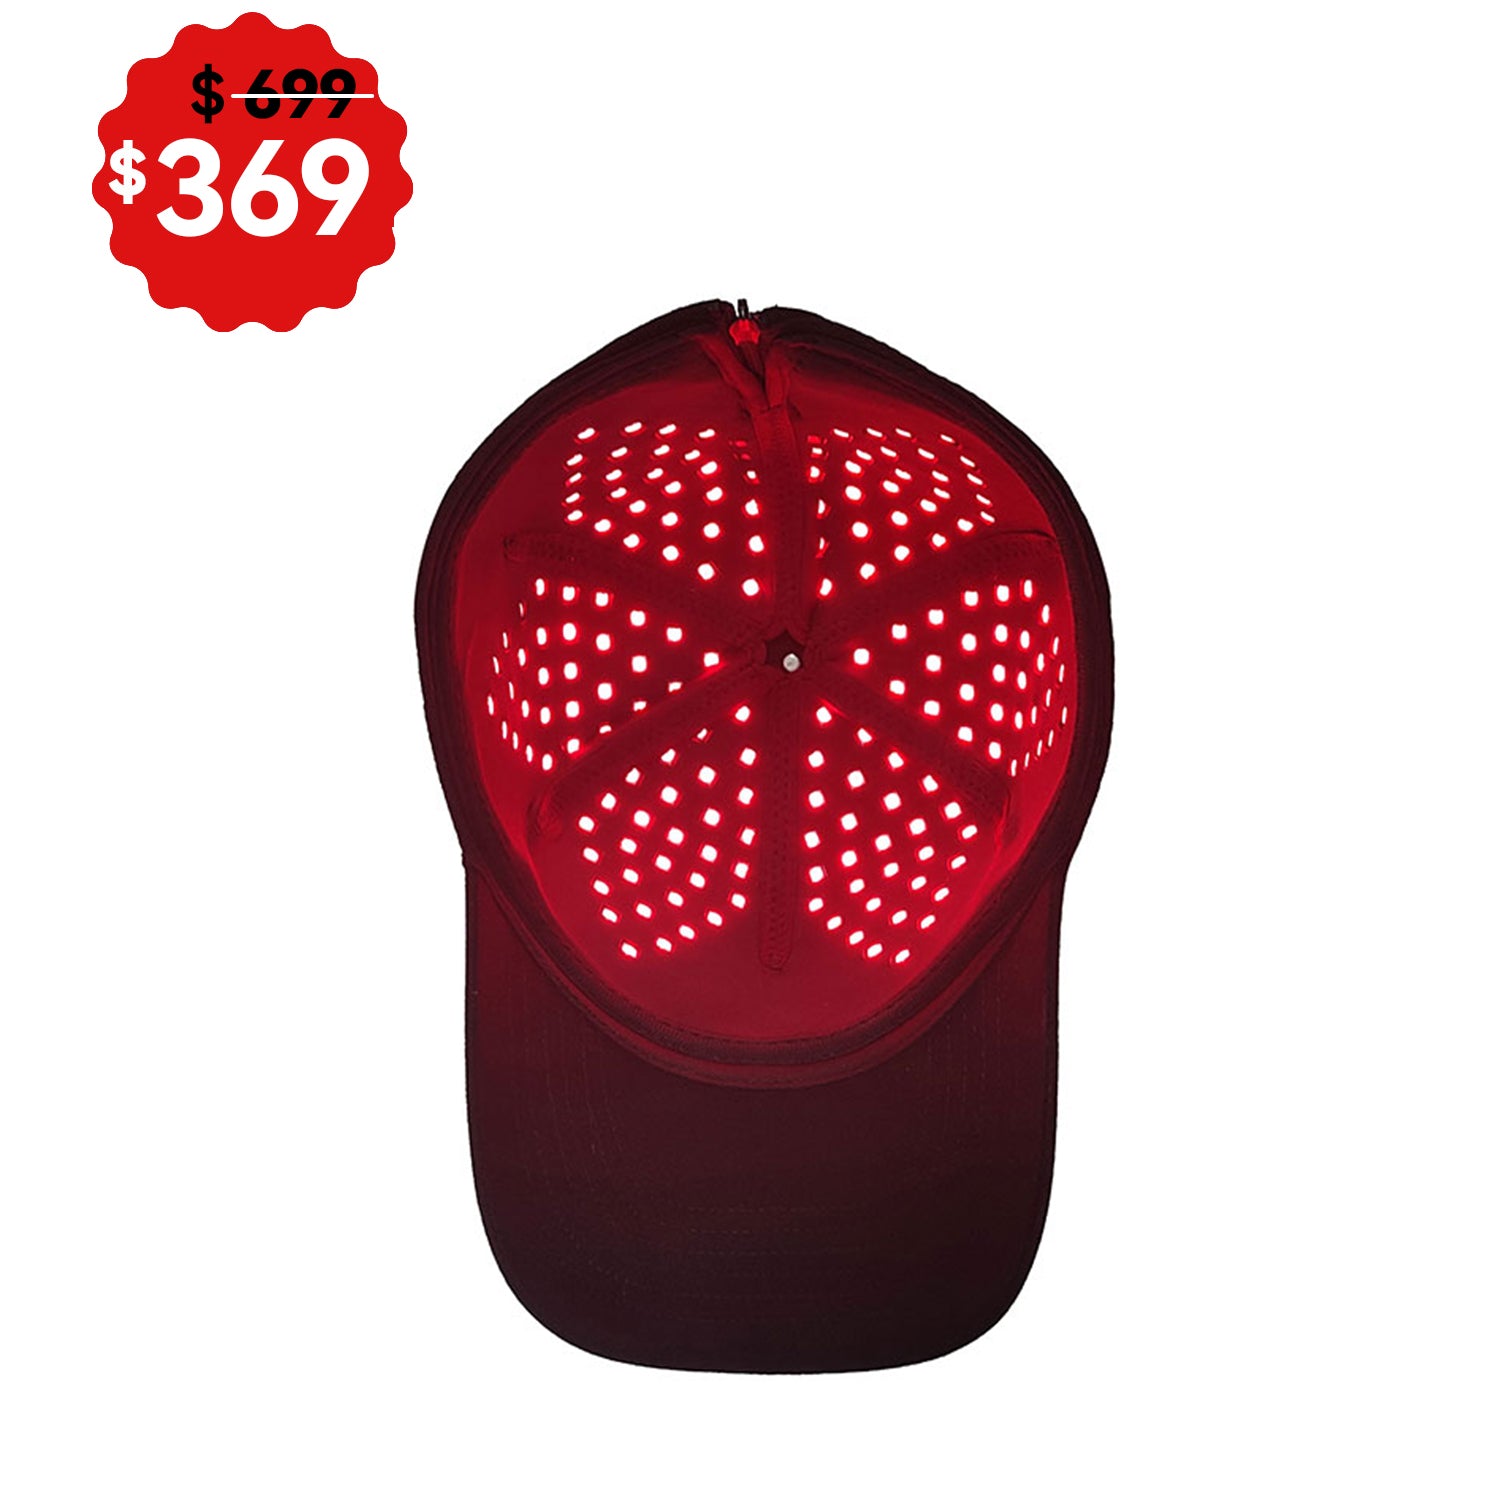 Megelin  World's Best Laser Red Light Therapy Cap For Hair Growth